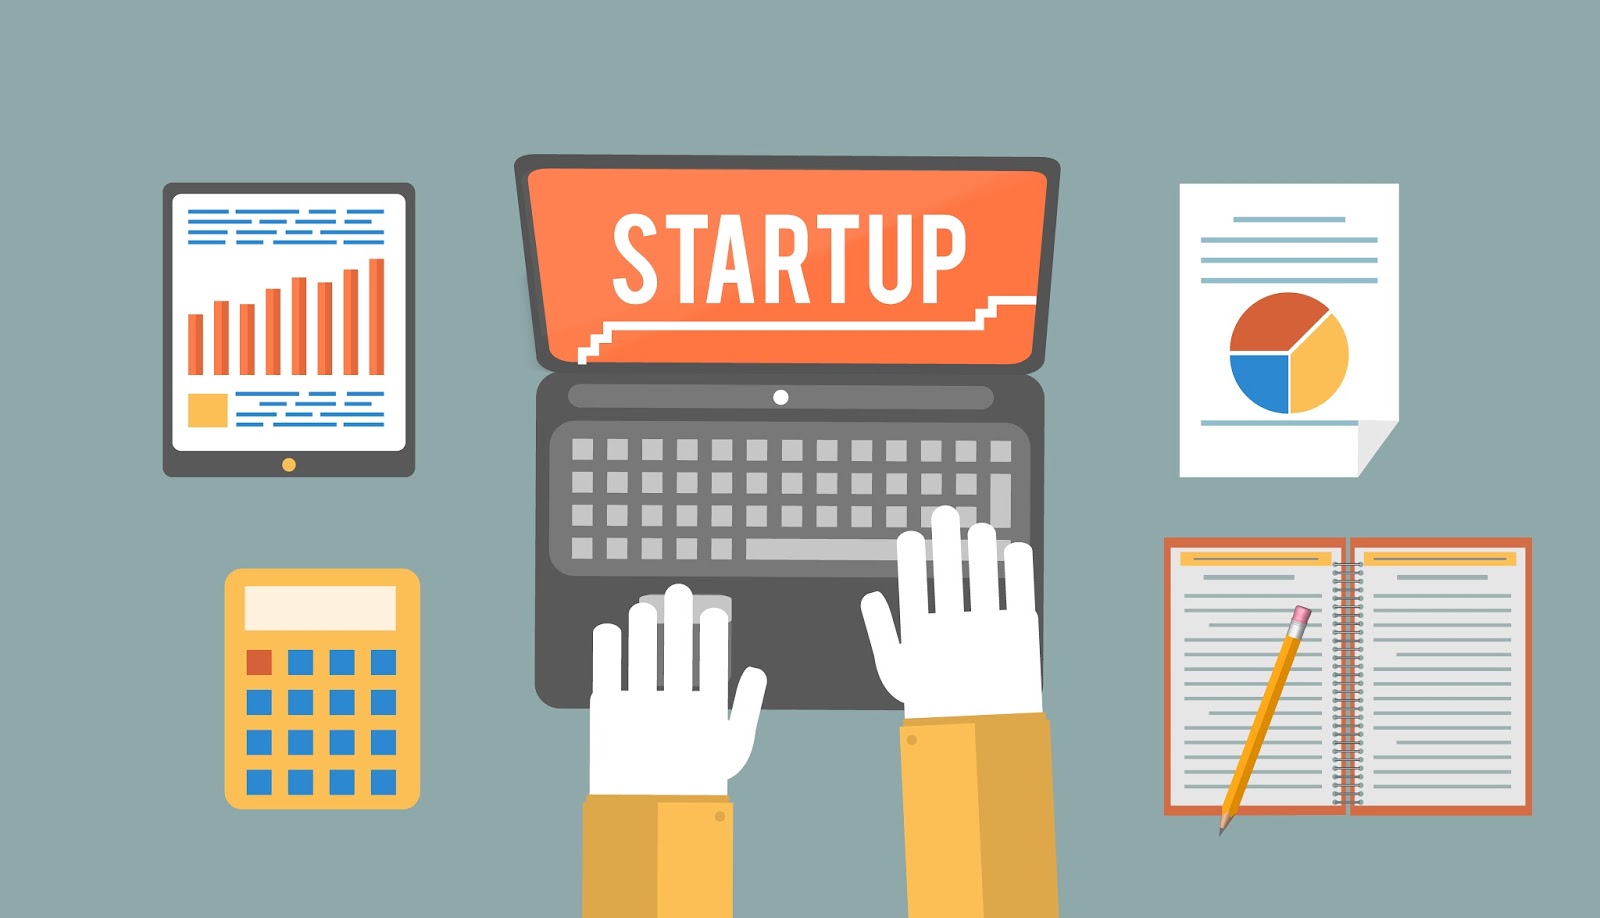 5 Actionable Web Design Tips to Kick-Start Your Start-up Business